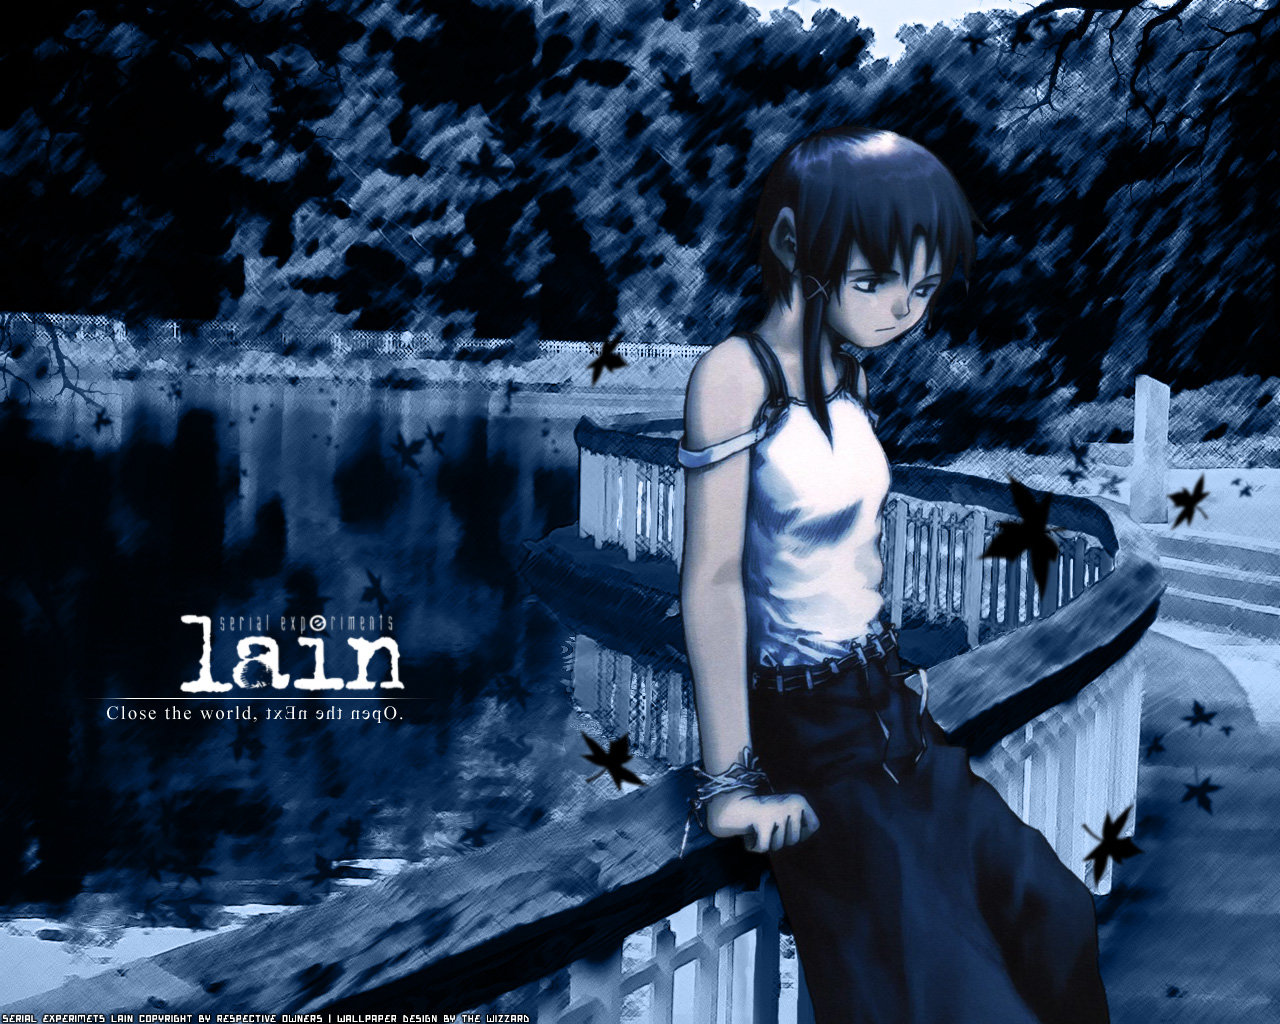 Download hd 1280x1024 Serial Experiments Lain desktop background ID:127912 for free